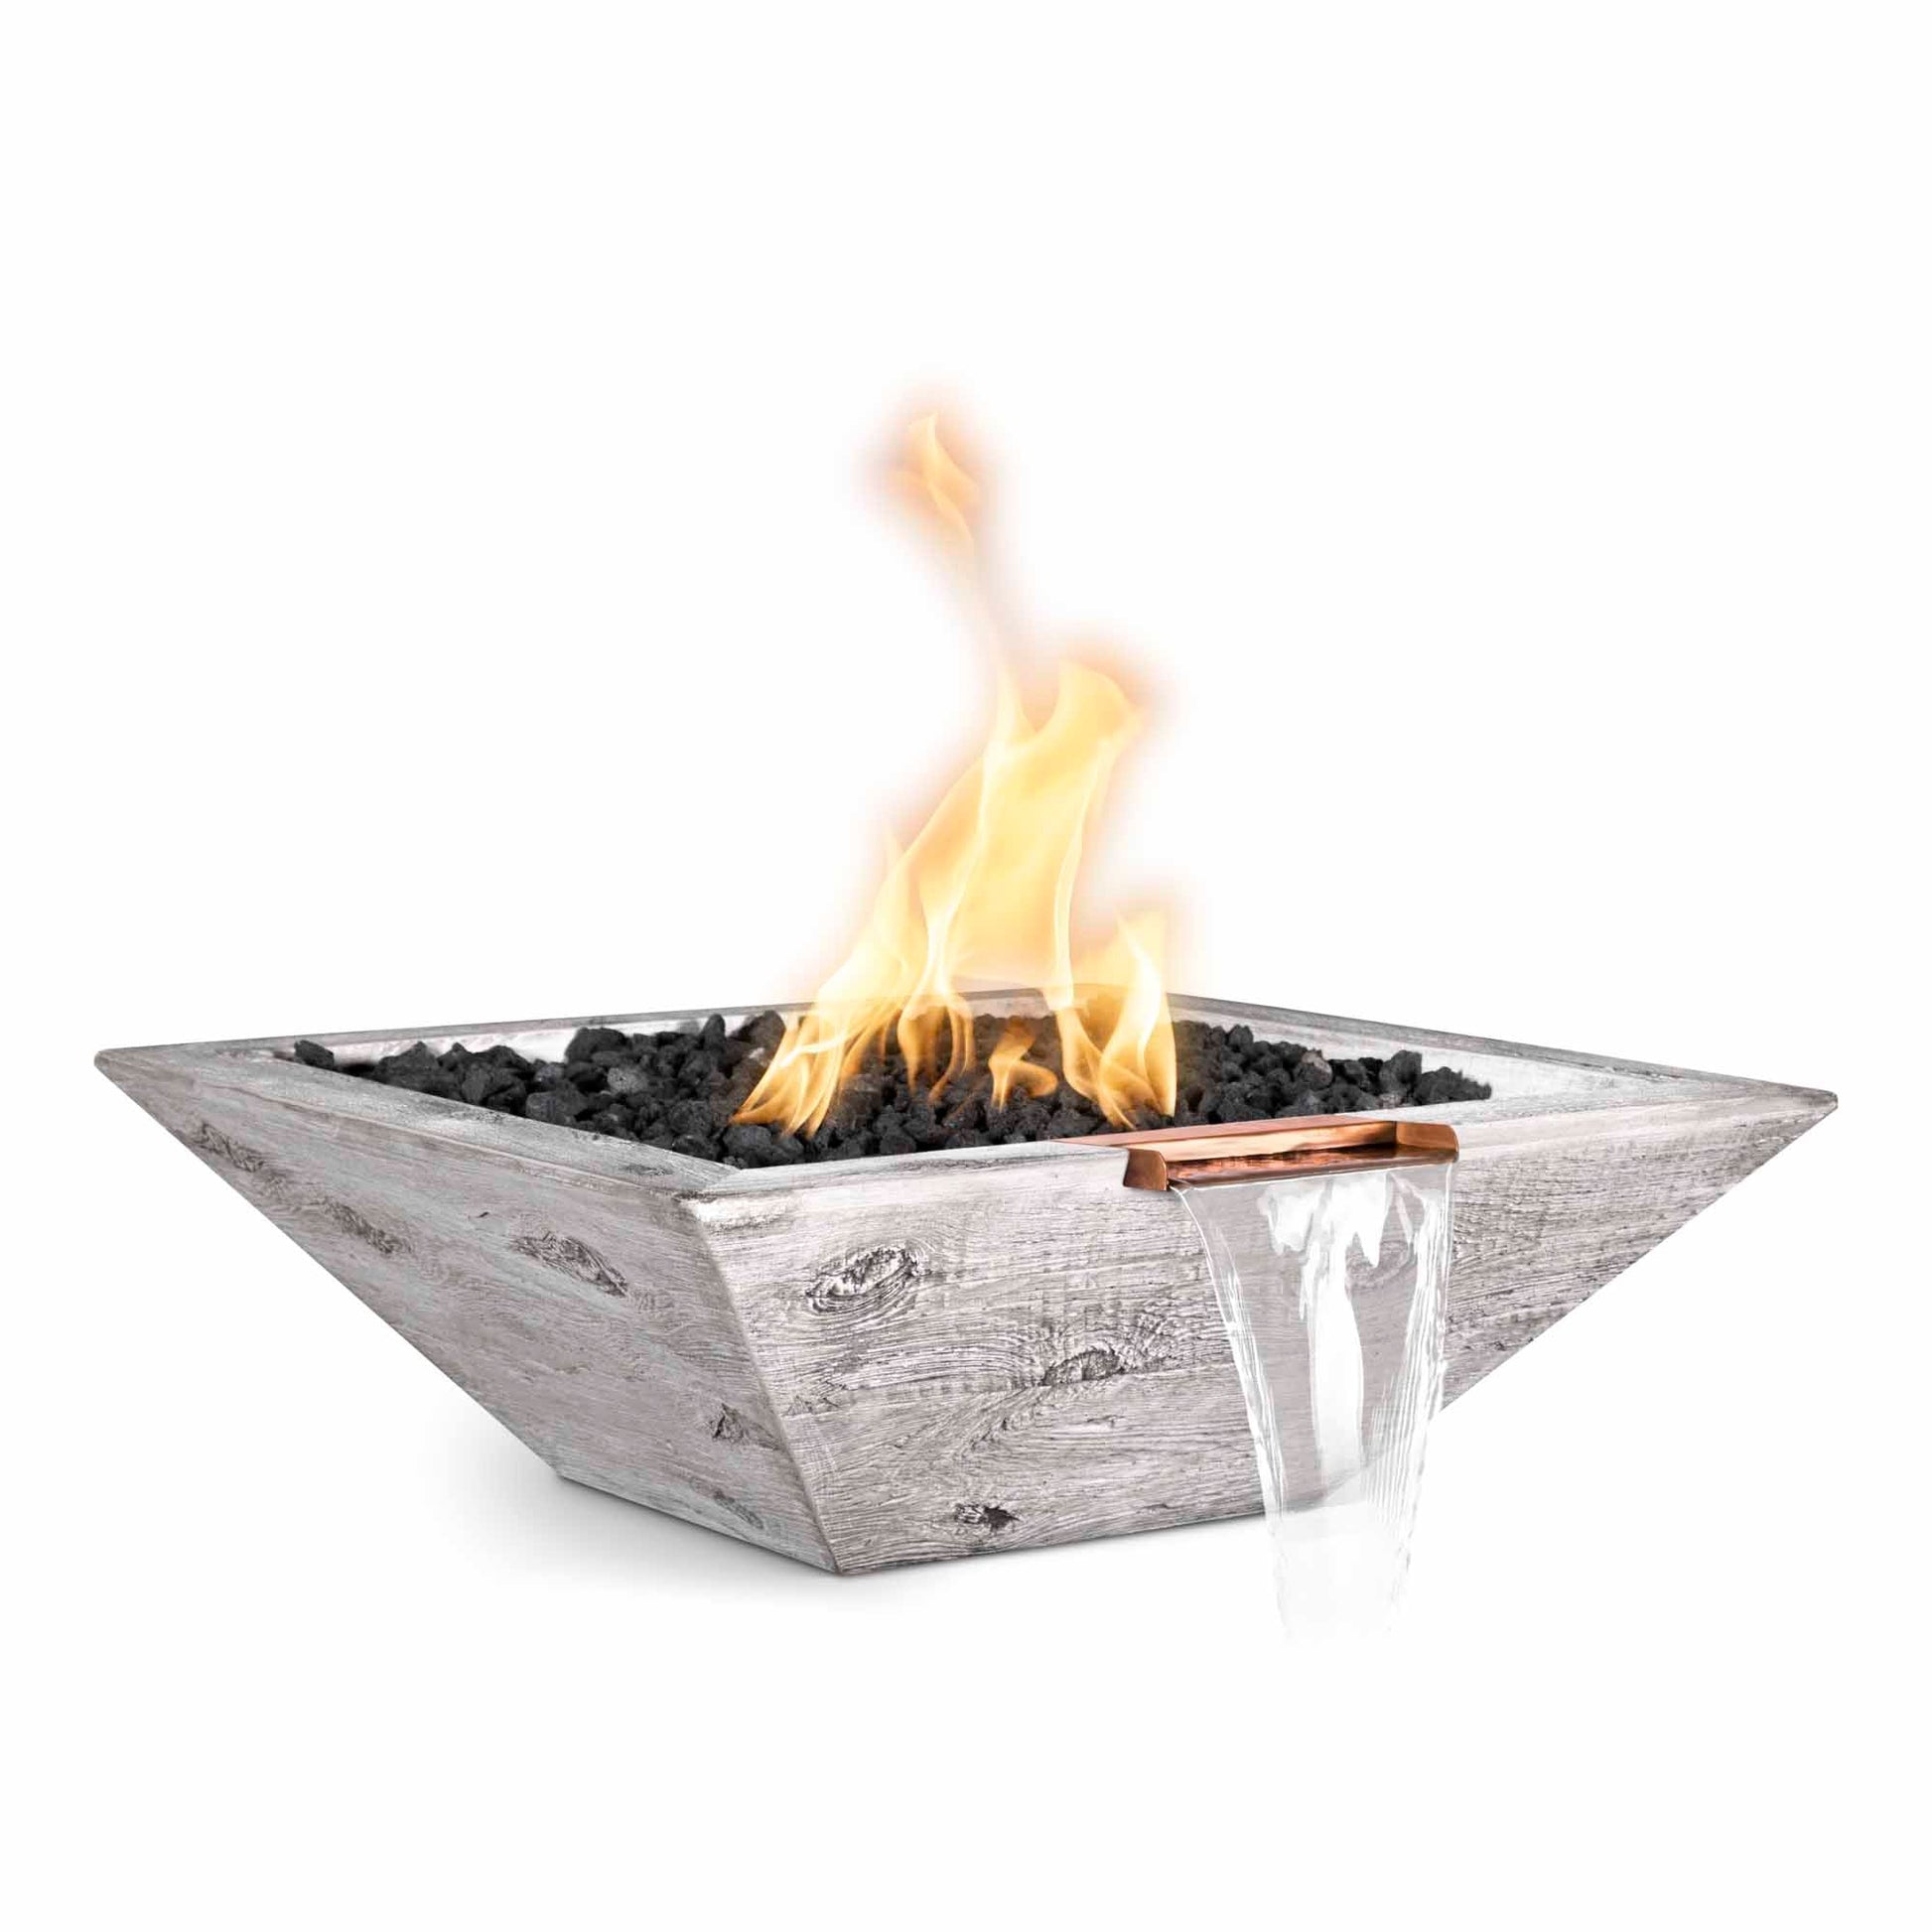 The Outdoor Plus Square Maya 24" Ebony Wood Grain Natural Gas Fire & Water Bowl with Match Lit with Flame Sense Ignition